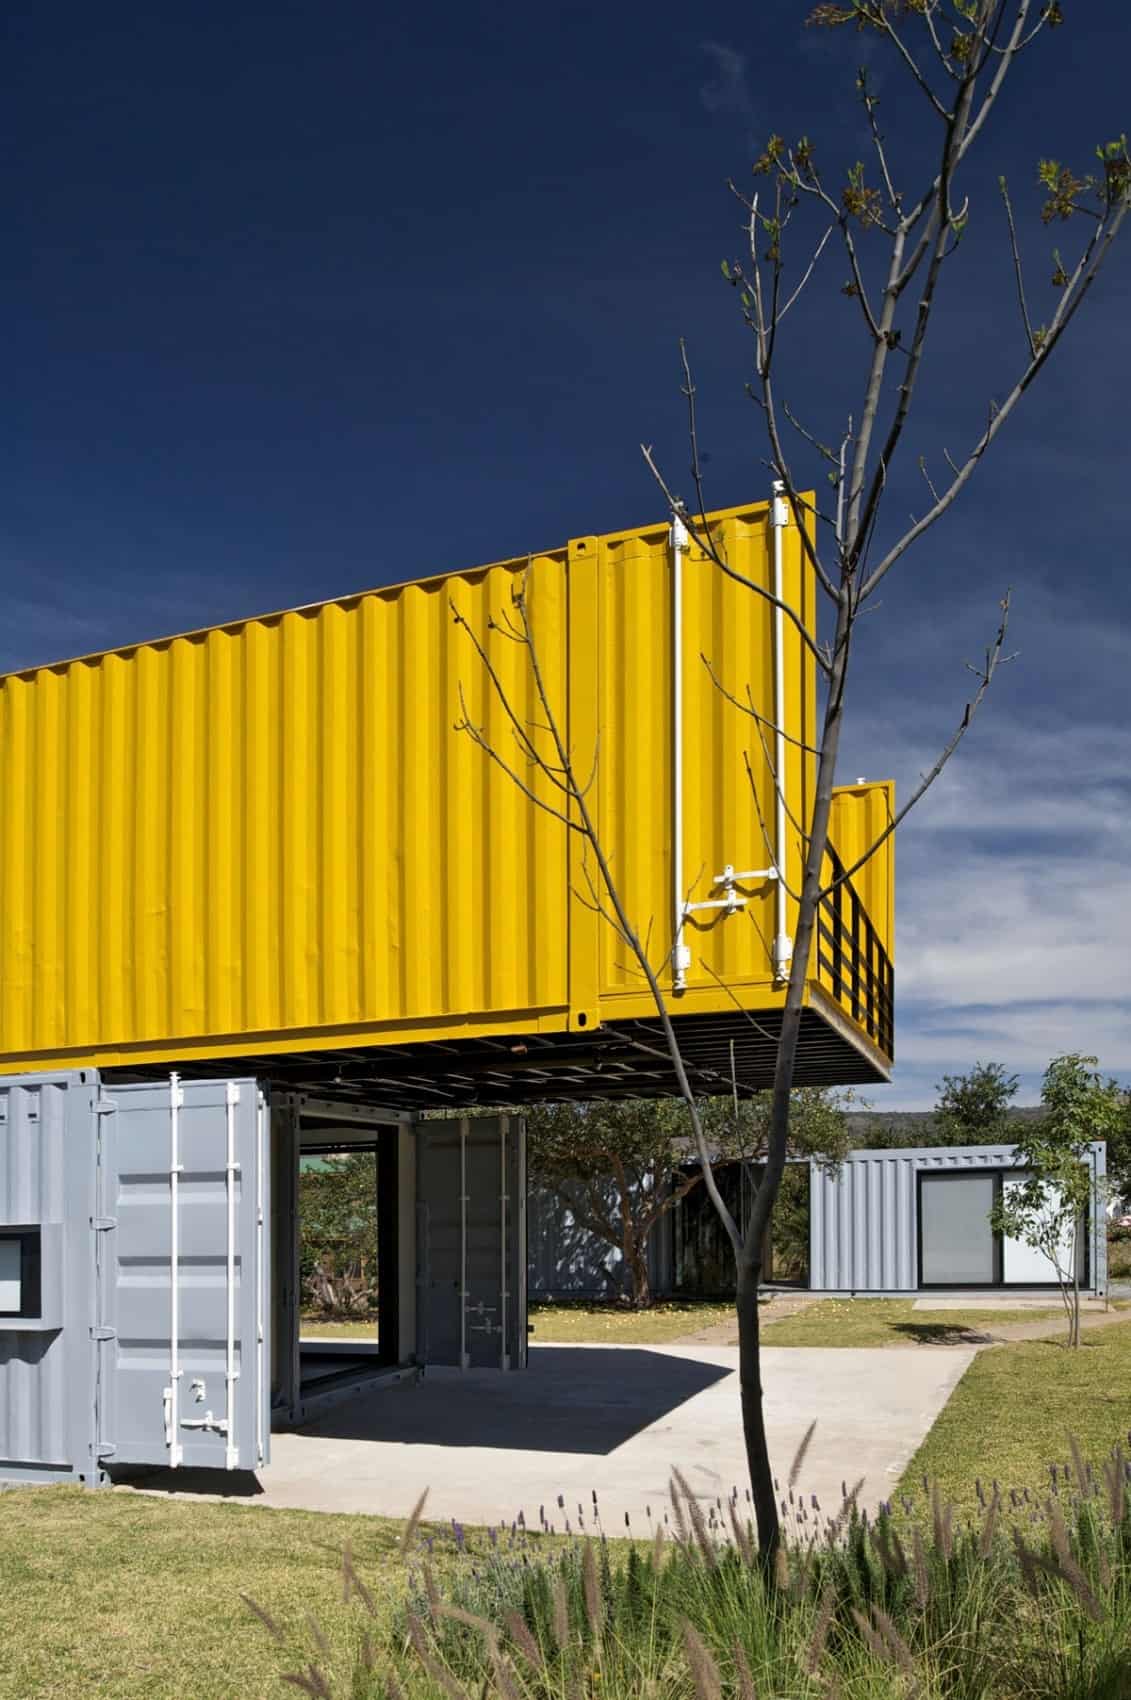 5-house-4-shipping-containers-1-guests.jpg